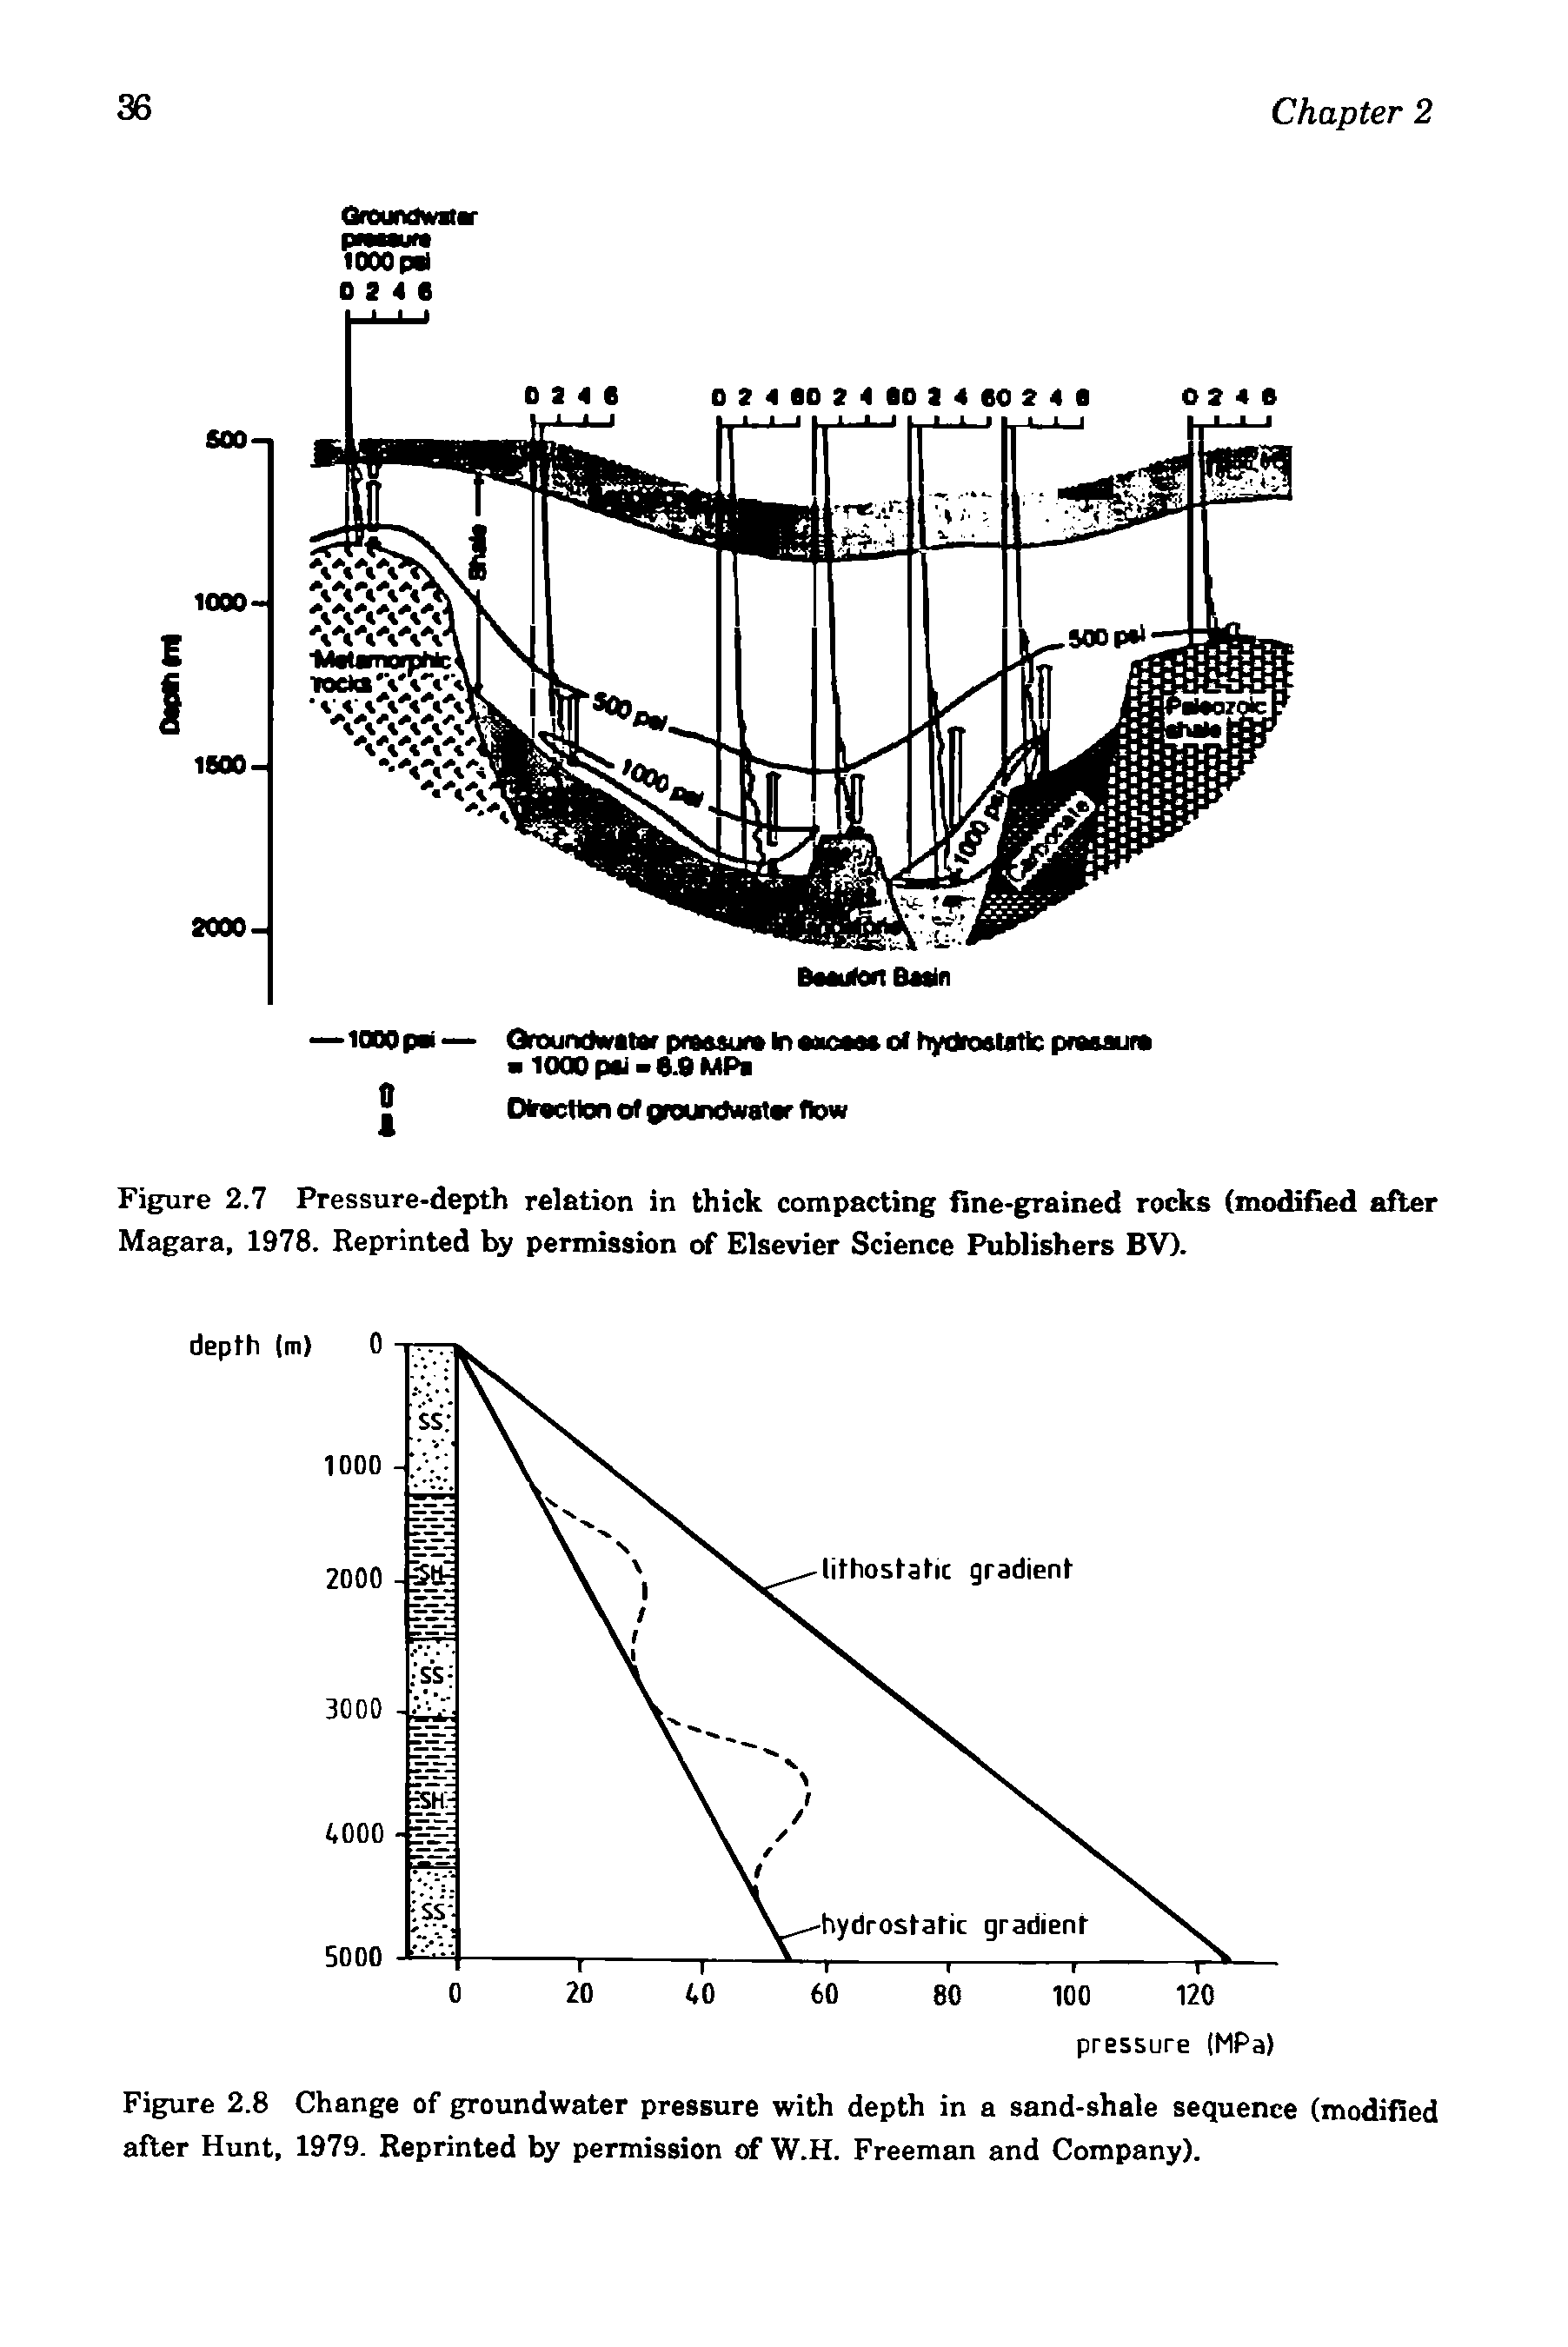 Figure 2.8 Change of groundwater pressure with depth in a sand-shale sequence (modified after Hunt, 1979. Reprinted by permission of W.H. Freeman and Company).